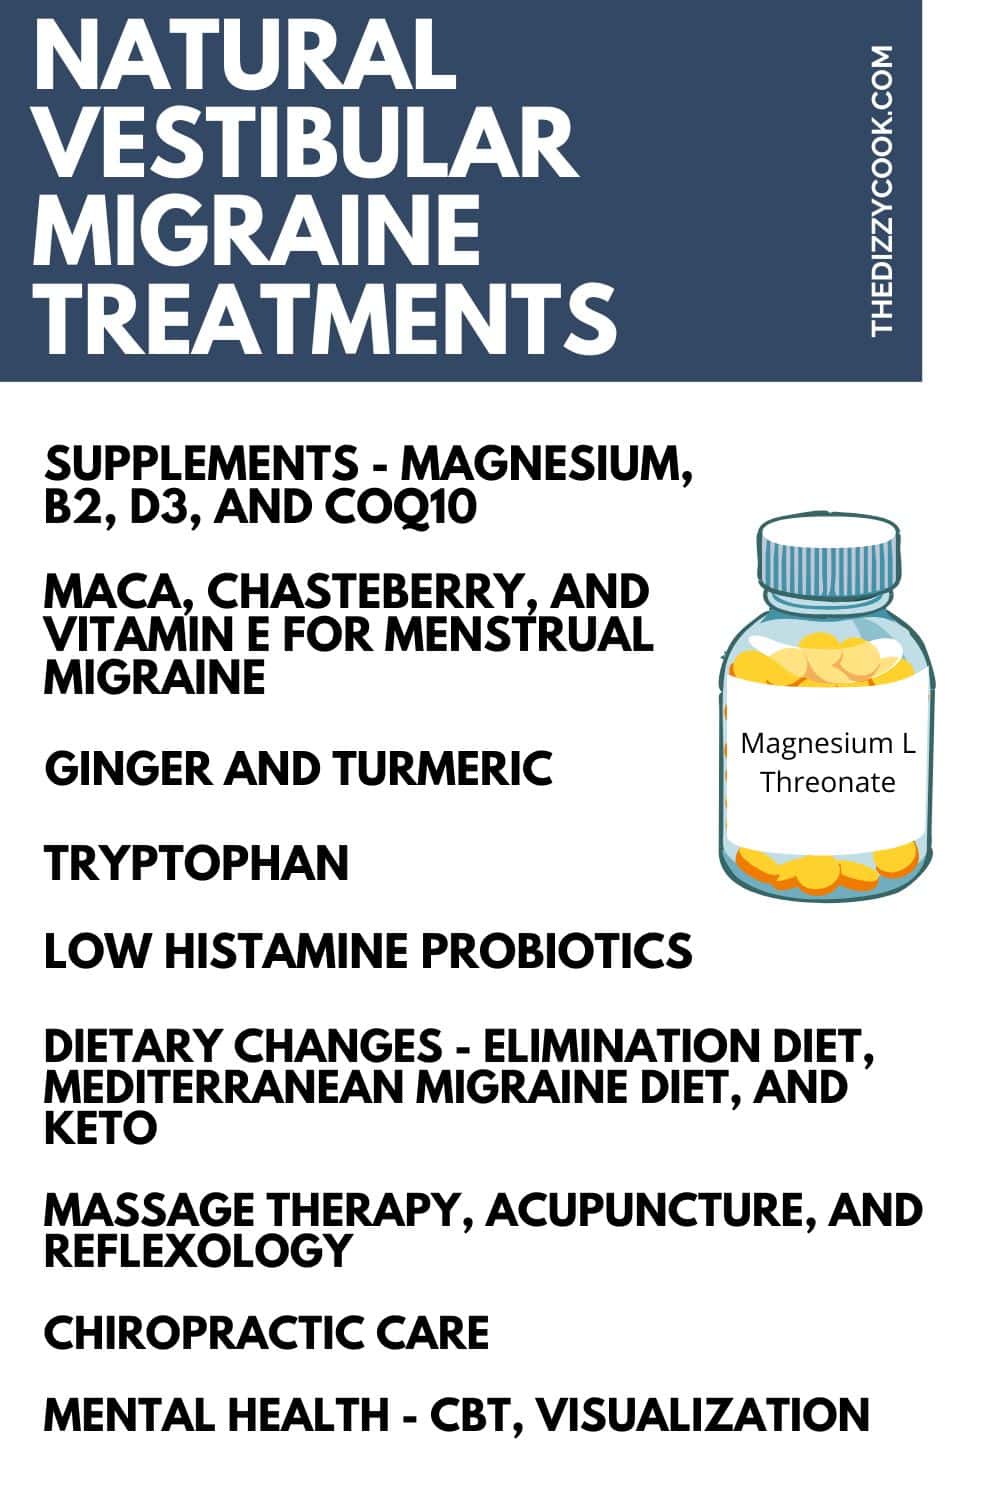 Infographic on natural vestibular migraine treatments listing supplements, diet, and massage therapy.